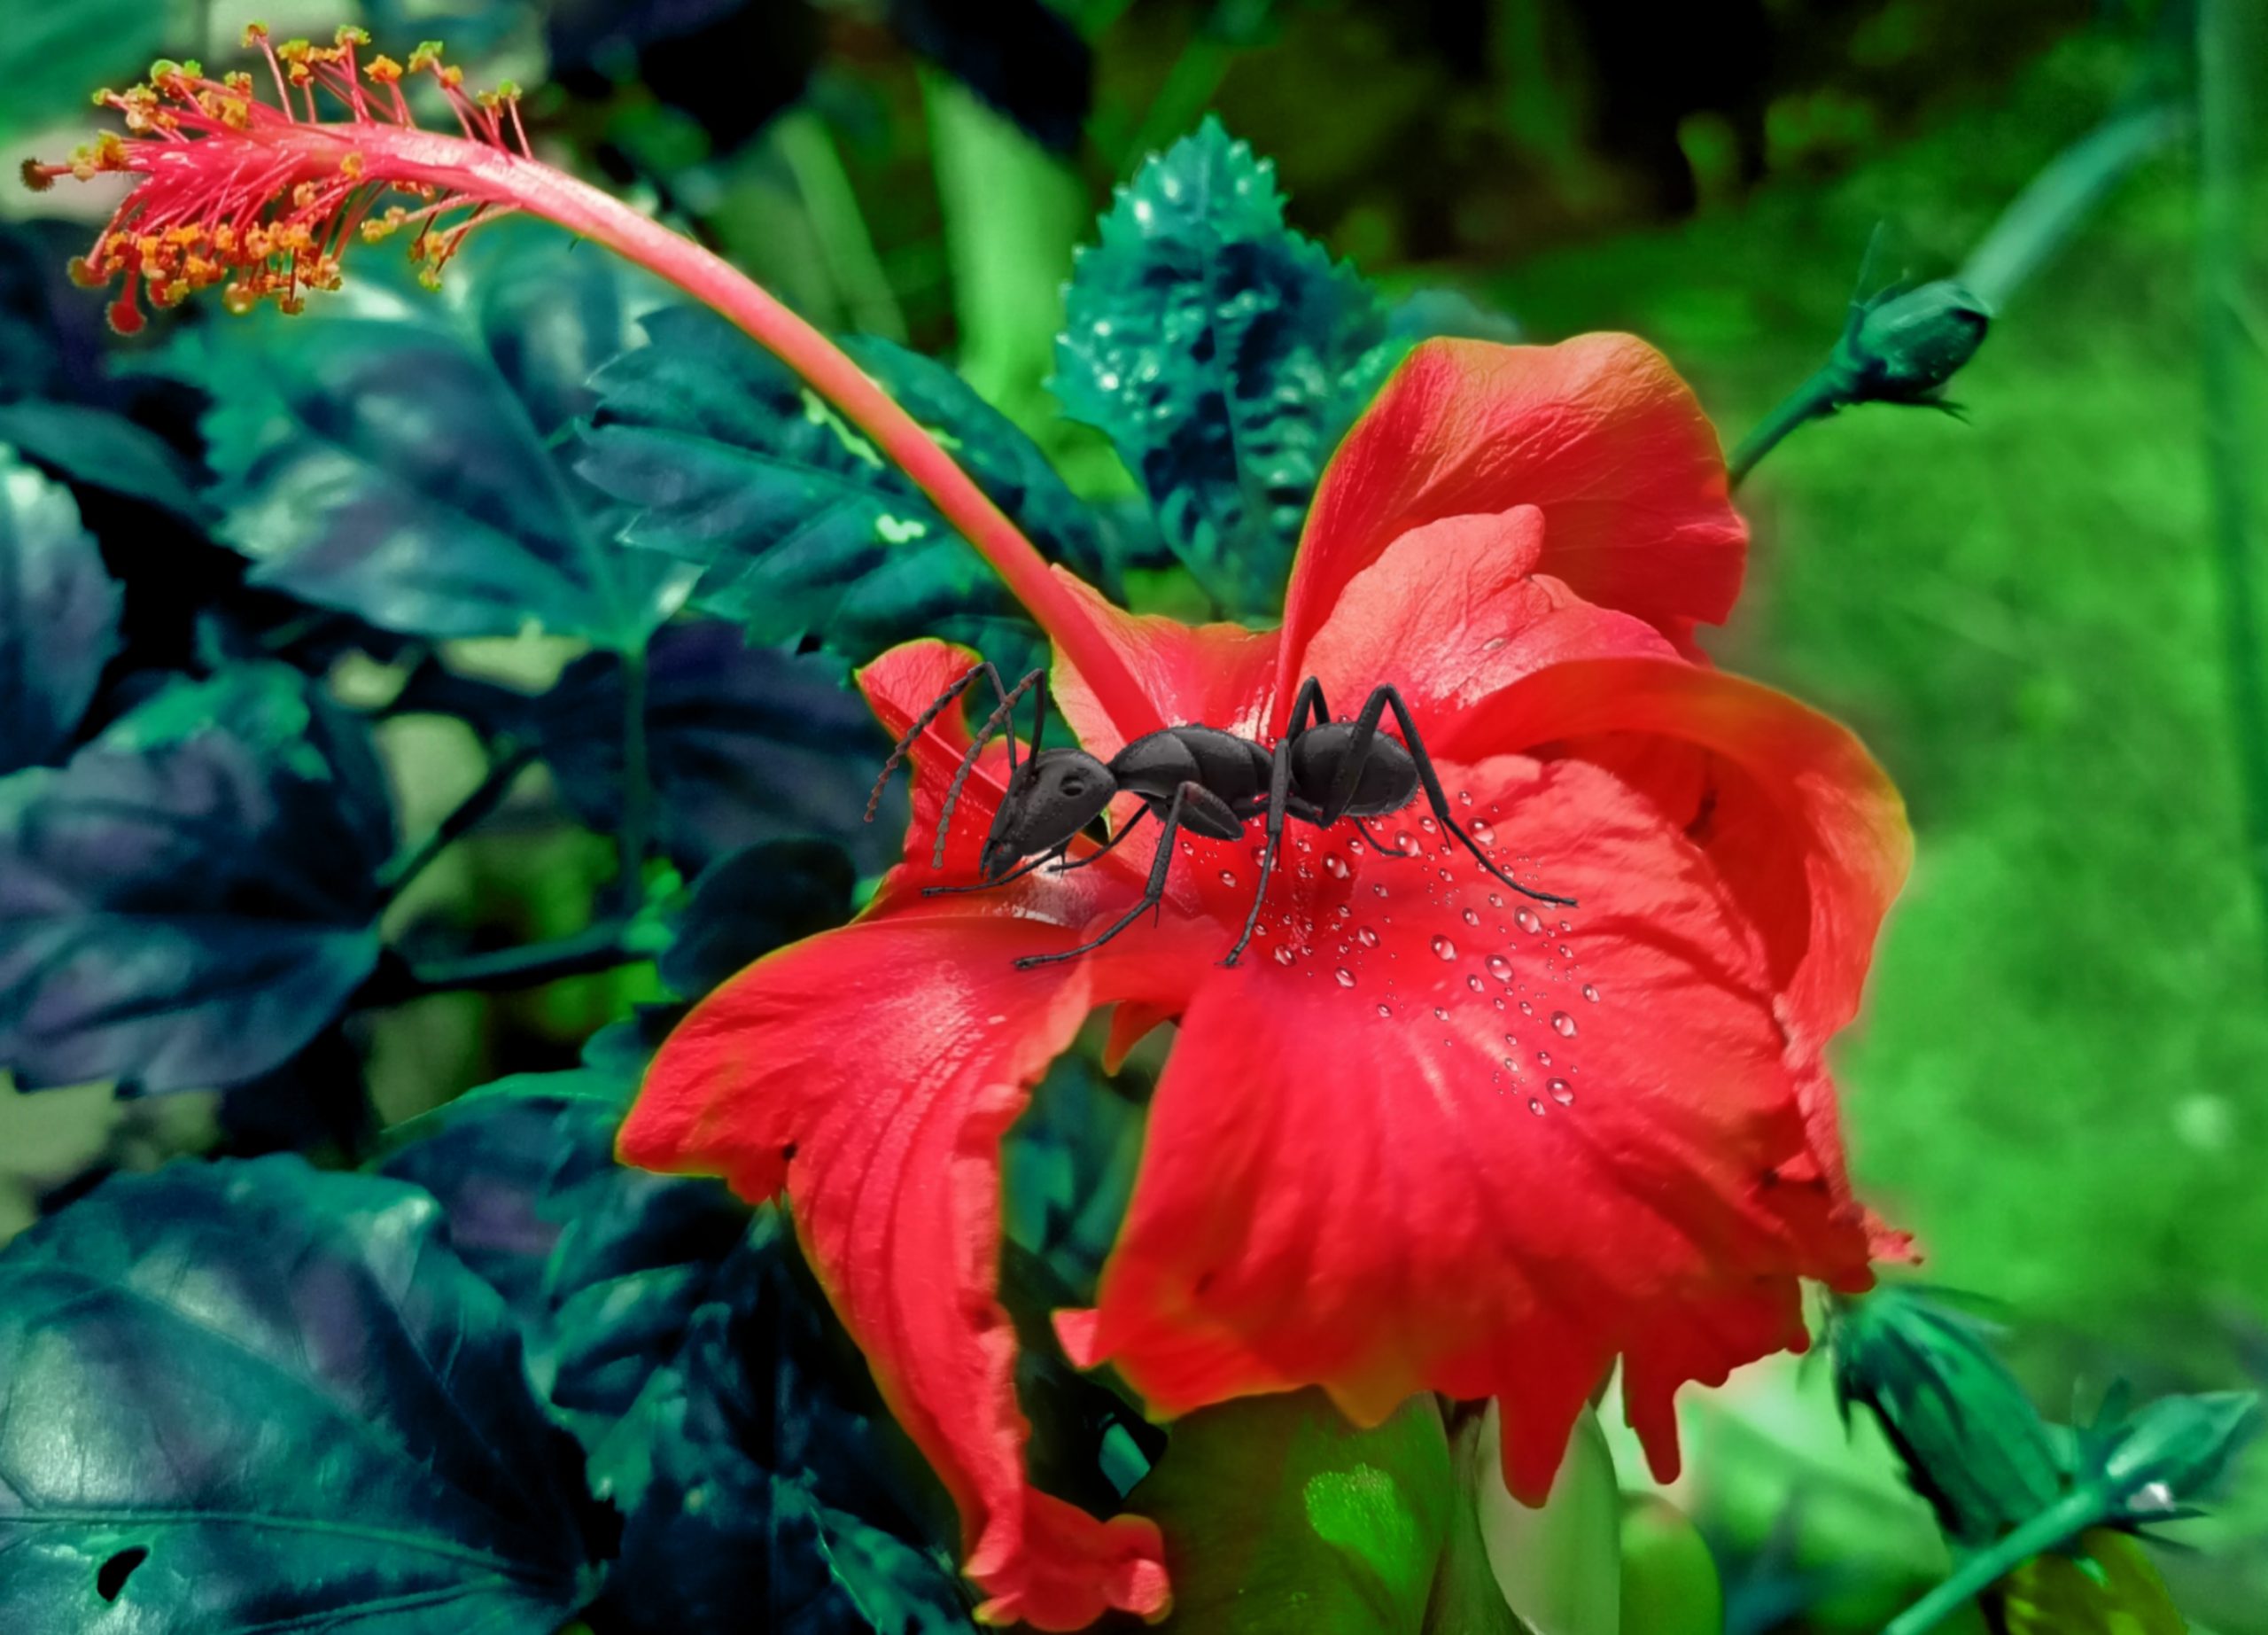 An ant on Hibiscus flower